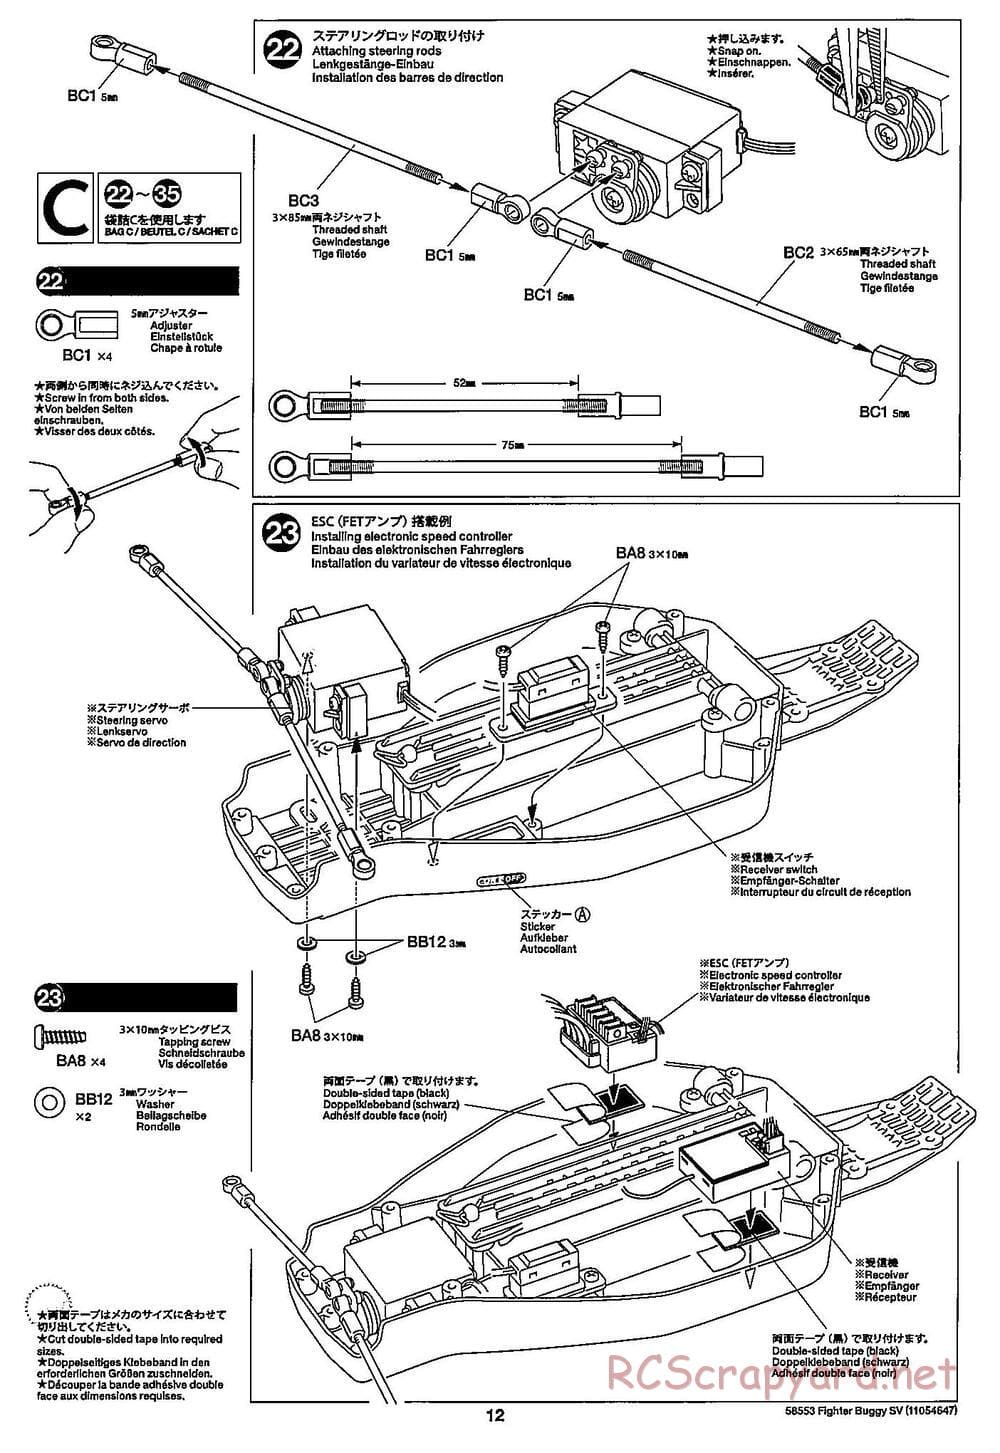 Tamiya - Fighter Buggy SV Chassis - Manual - Page 12